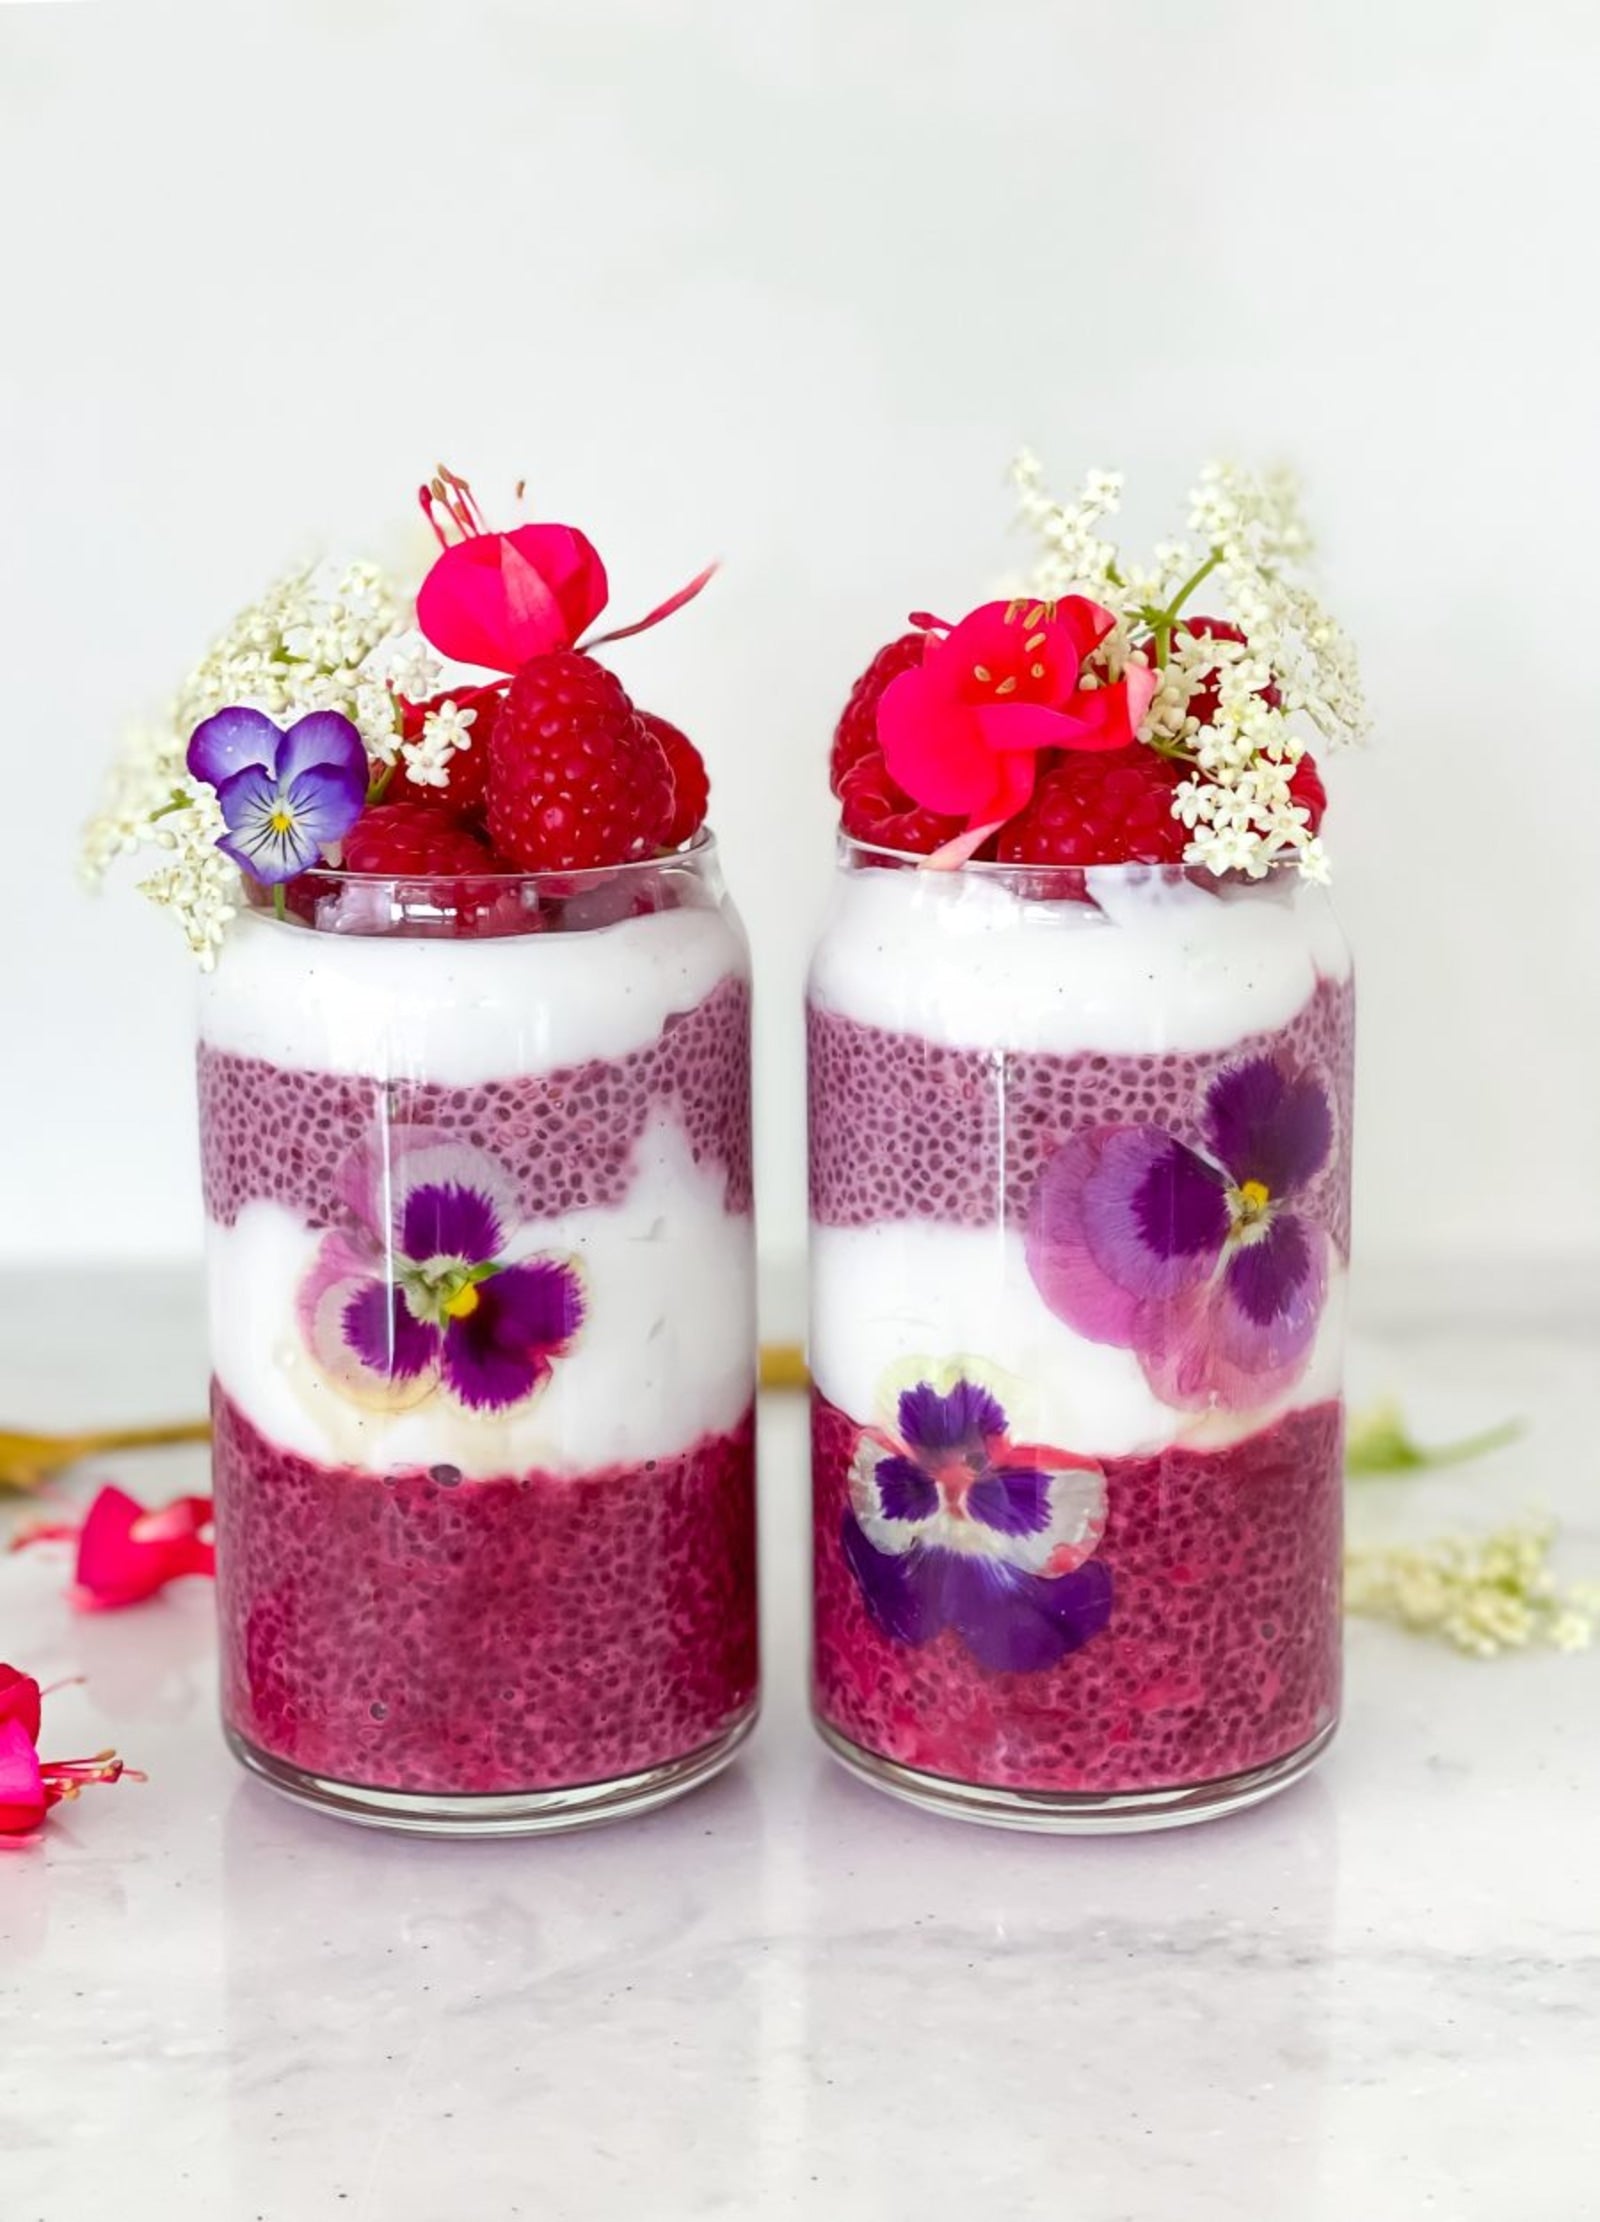 Beetroot Strawberry Chia Pudding